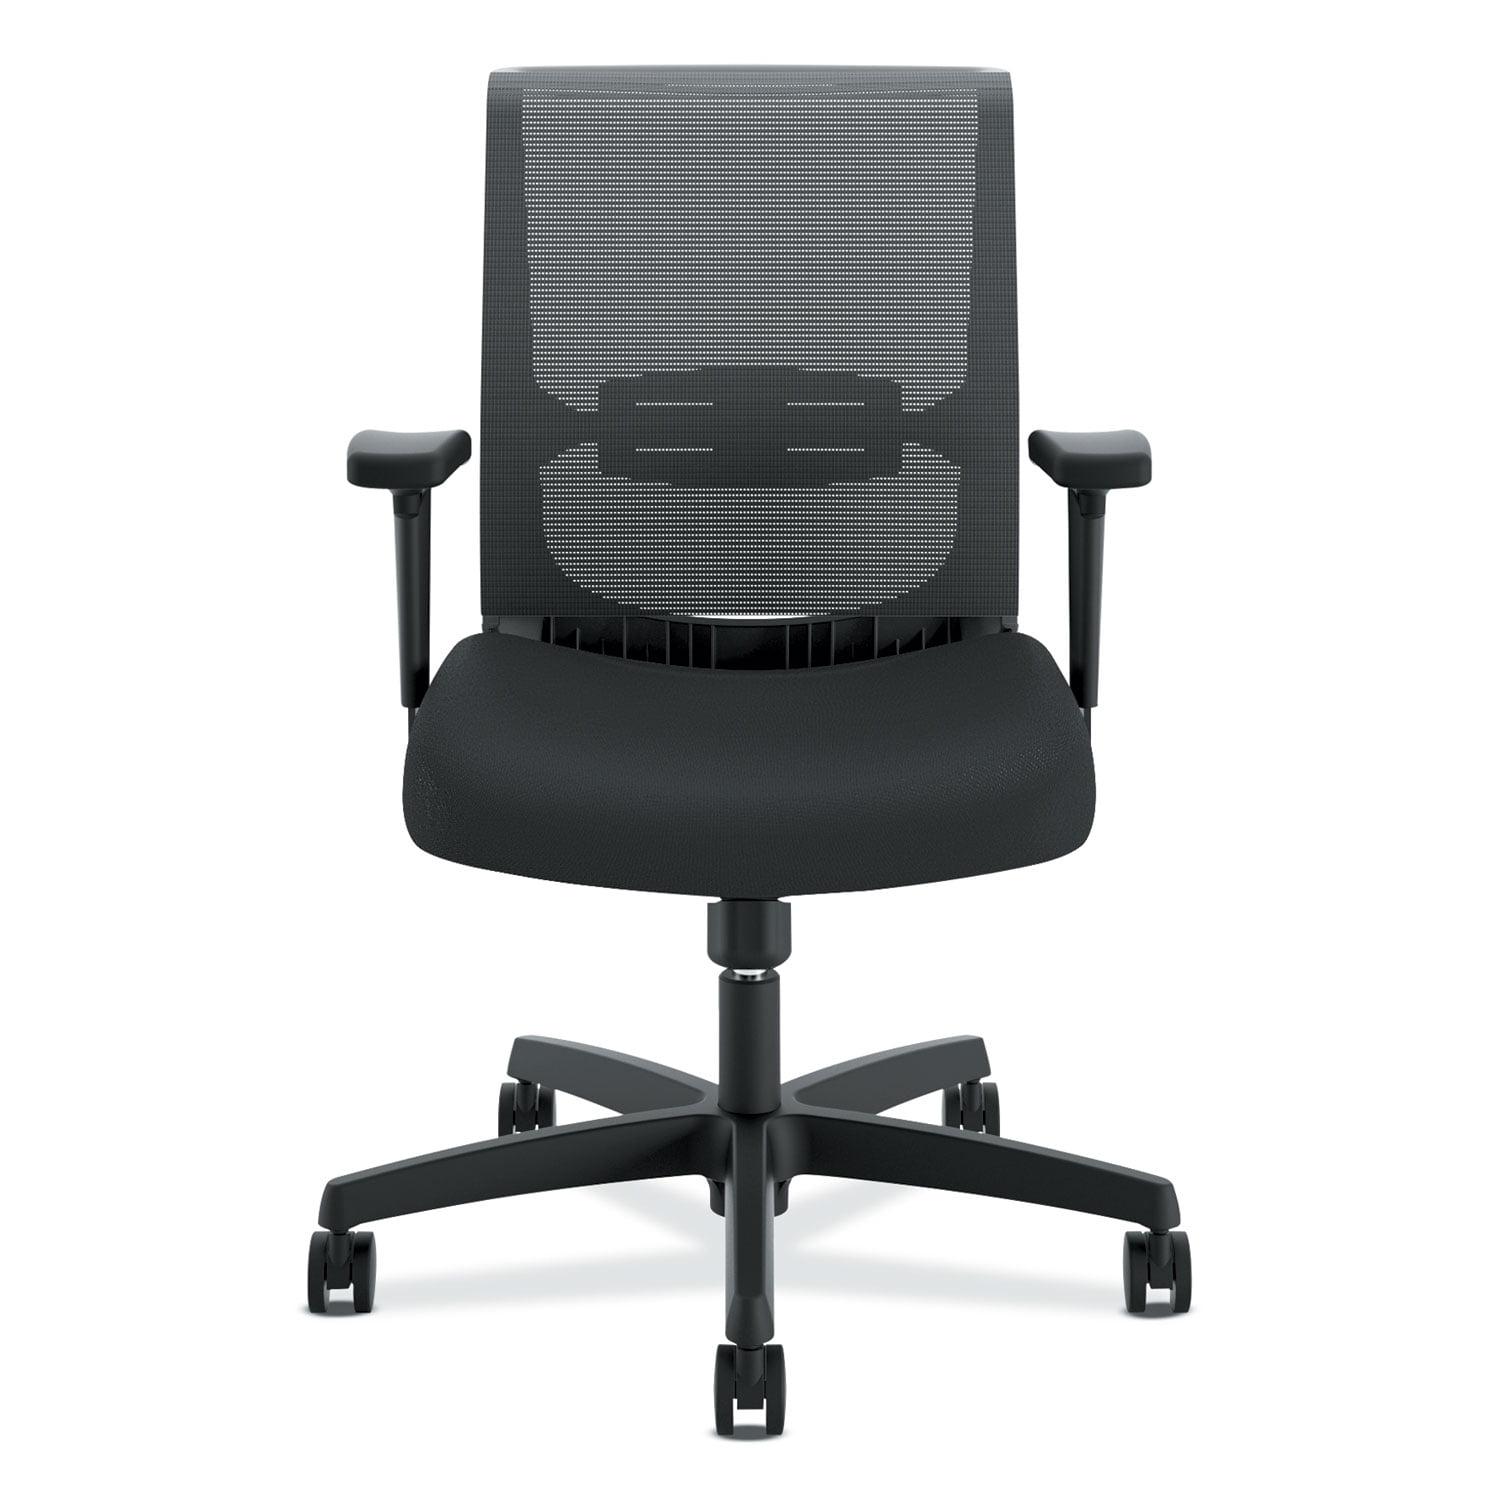 in Black Details about   HON BASYX Biometryx Commercial-Grade Task Chair BSX155V Office Chair 